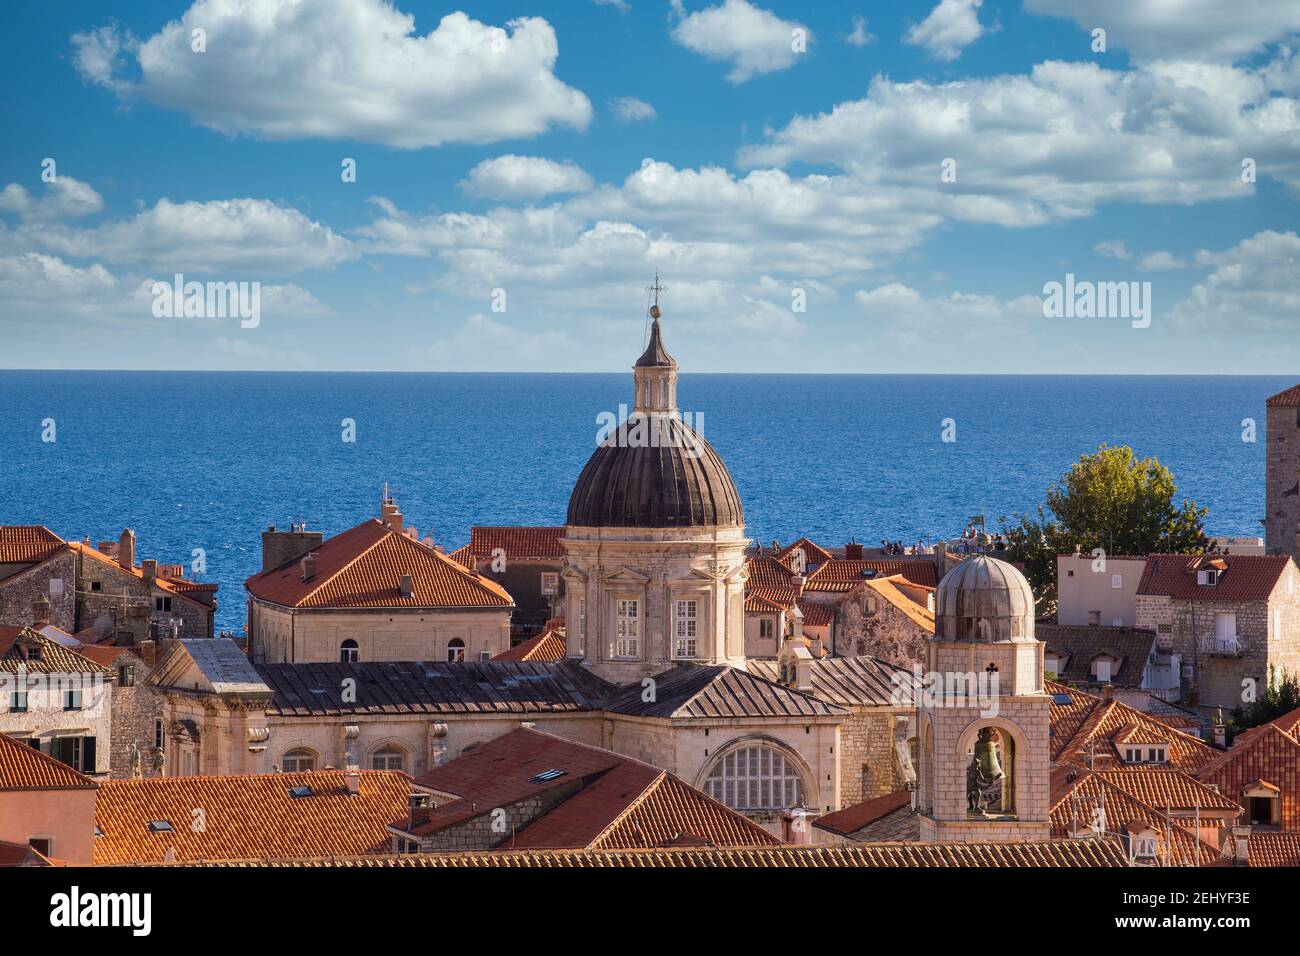 A Tower Overlooking the City of Dubrovnik,  Blue Sea with blue skies and white clouds Stock Photo